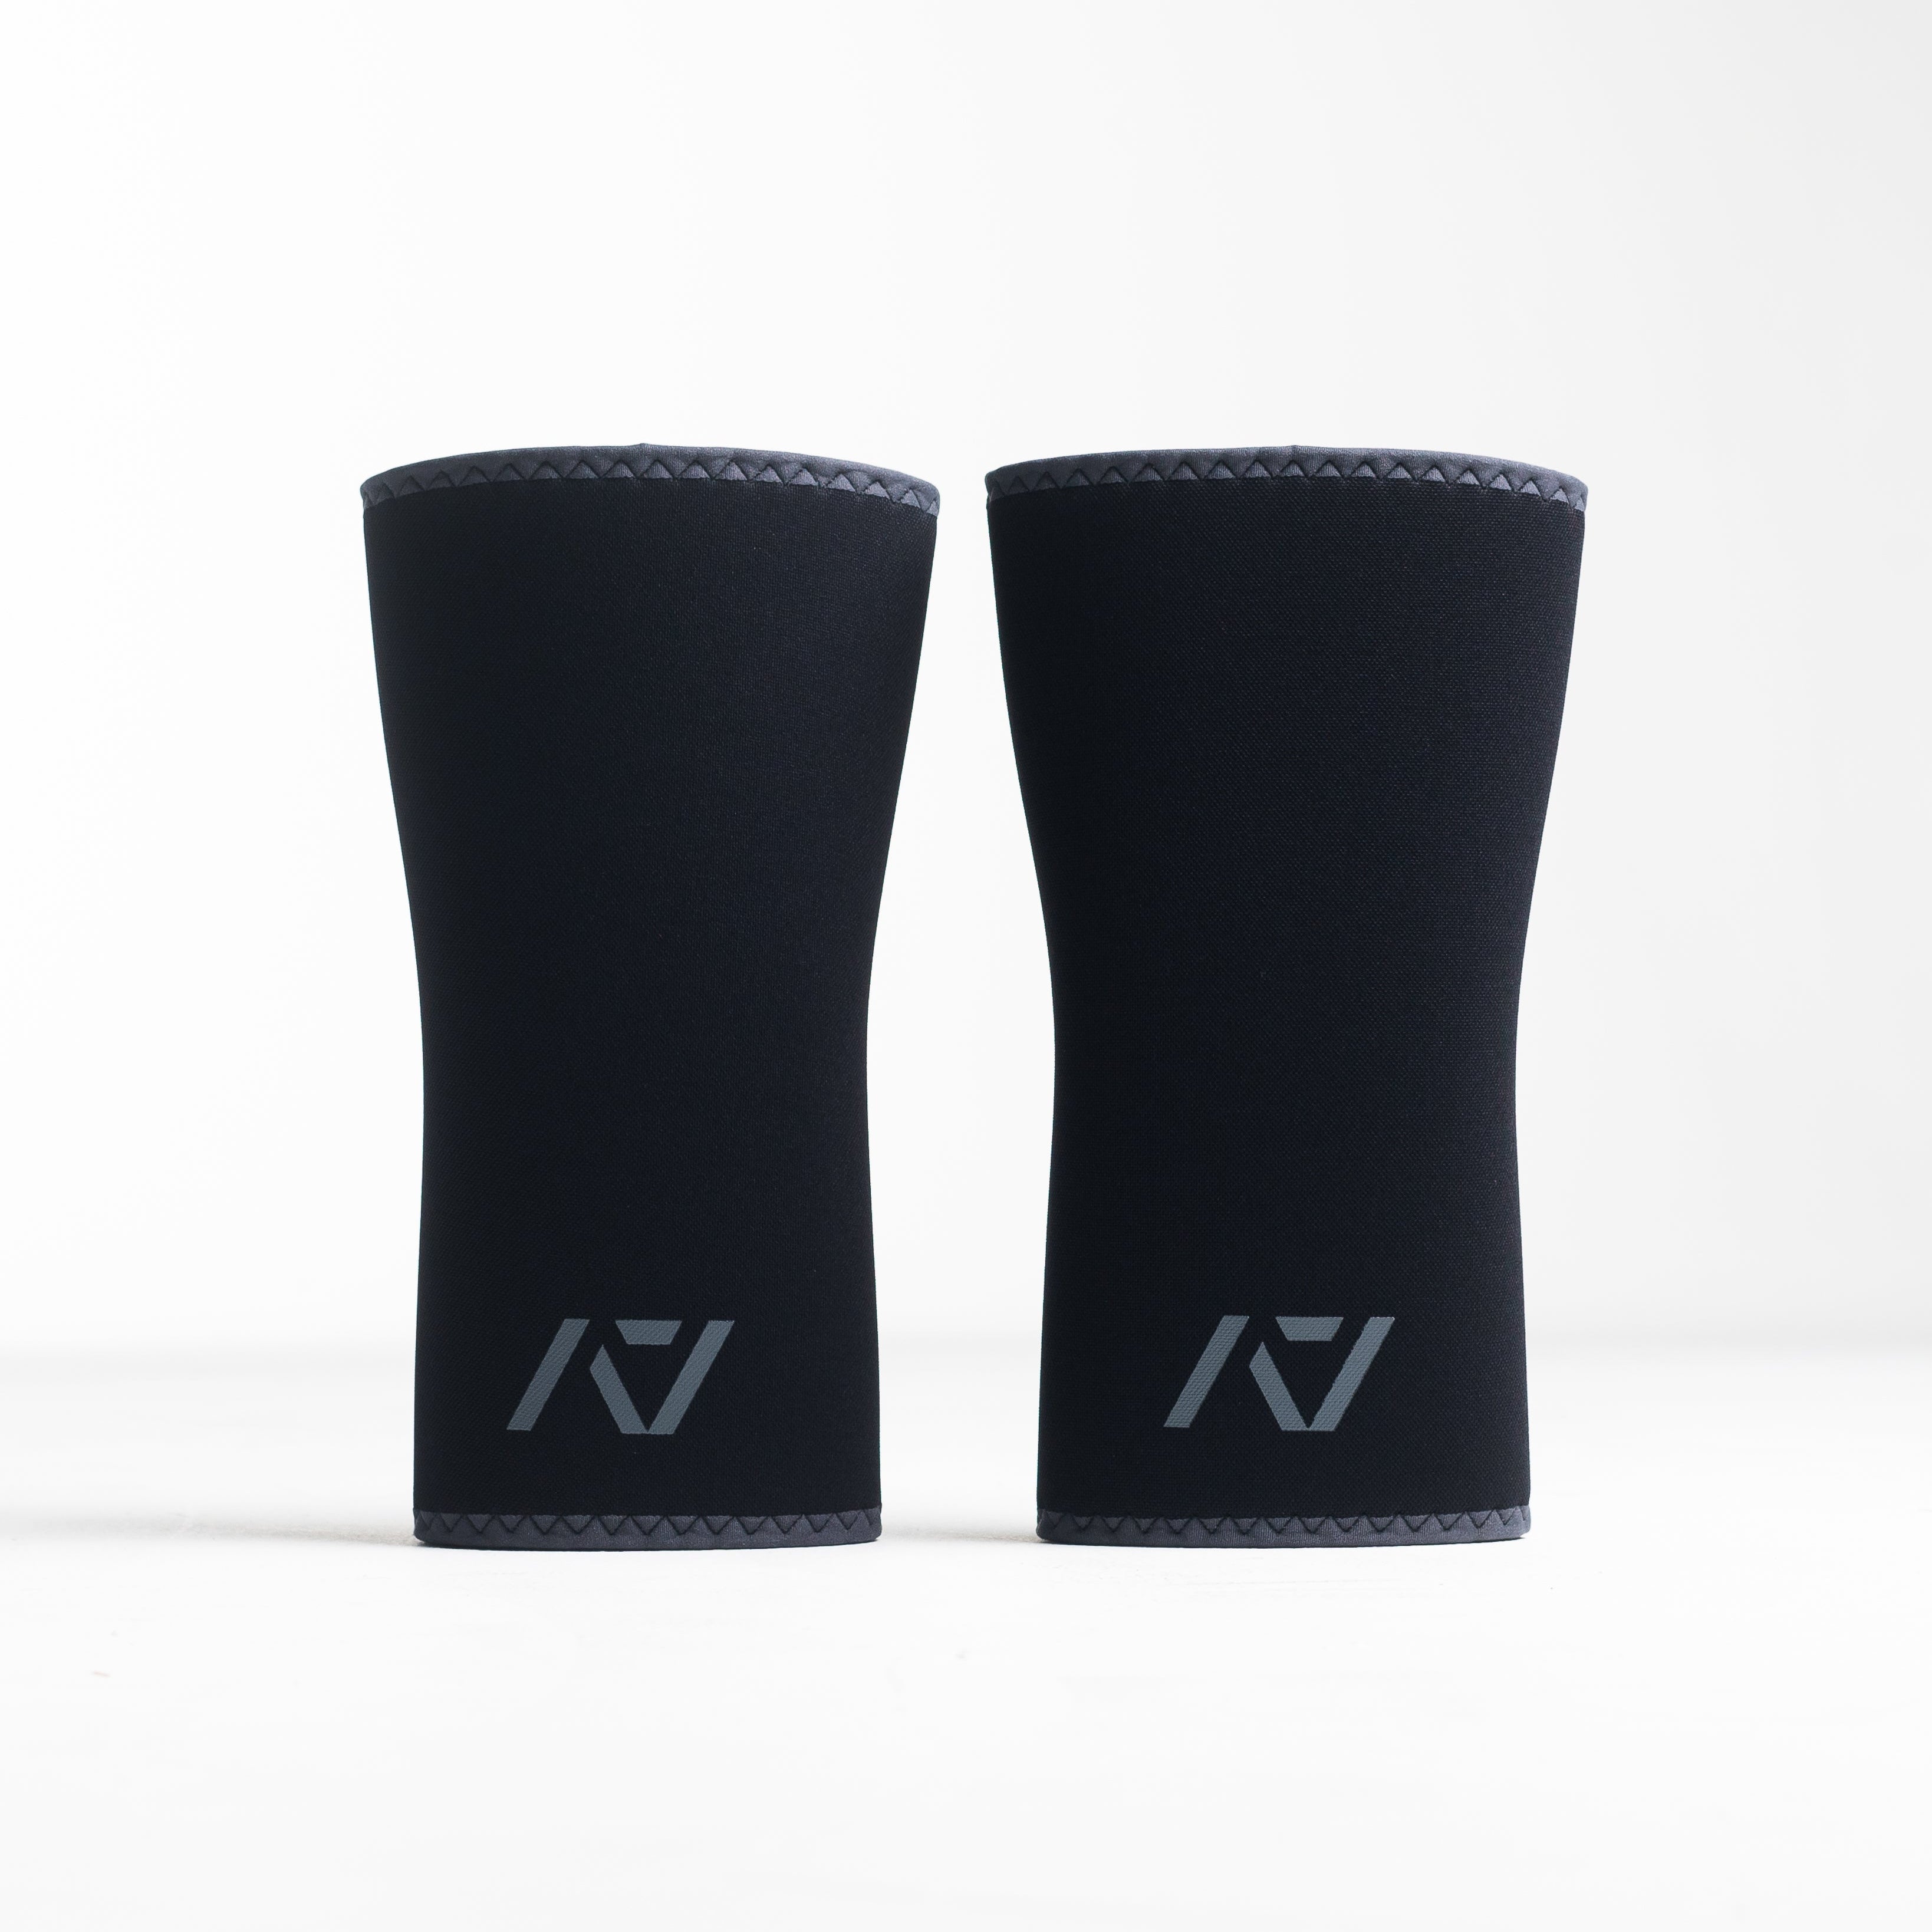 A7 IPF Approved Hourglass Knee Sleeves feature an hourglass-shaped centre taper fit to help provide knee compression while maintaining proper tightness around the calf and quad, offered in three stiffnesses (Flexi, Stiff and Rigor Mortis). Shop the full A7 Powerlifting IPF Approved Equipment collection. The IPF Approved Kit includes Powerlifting Singlet, A7 Meet Shirt, A7 Zebra Wrist Wraps and A7 Deadlift Socks. All A7 Powerlifting Equipment shipping to UK, Norway, Switzerland and Iceland. 